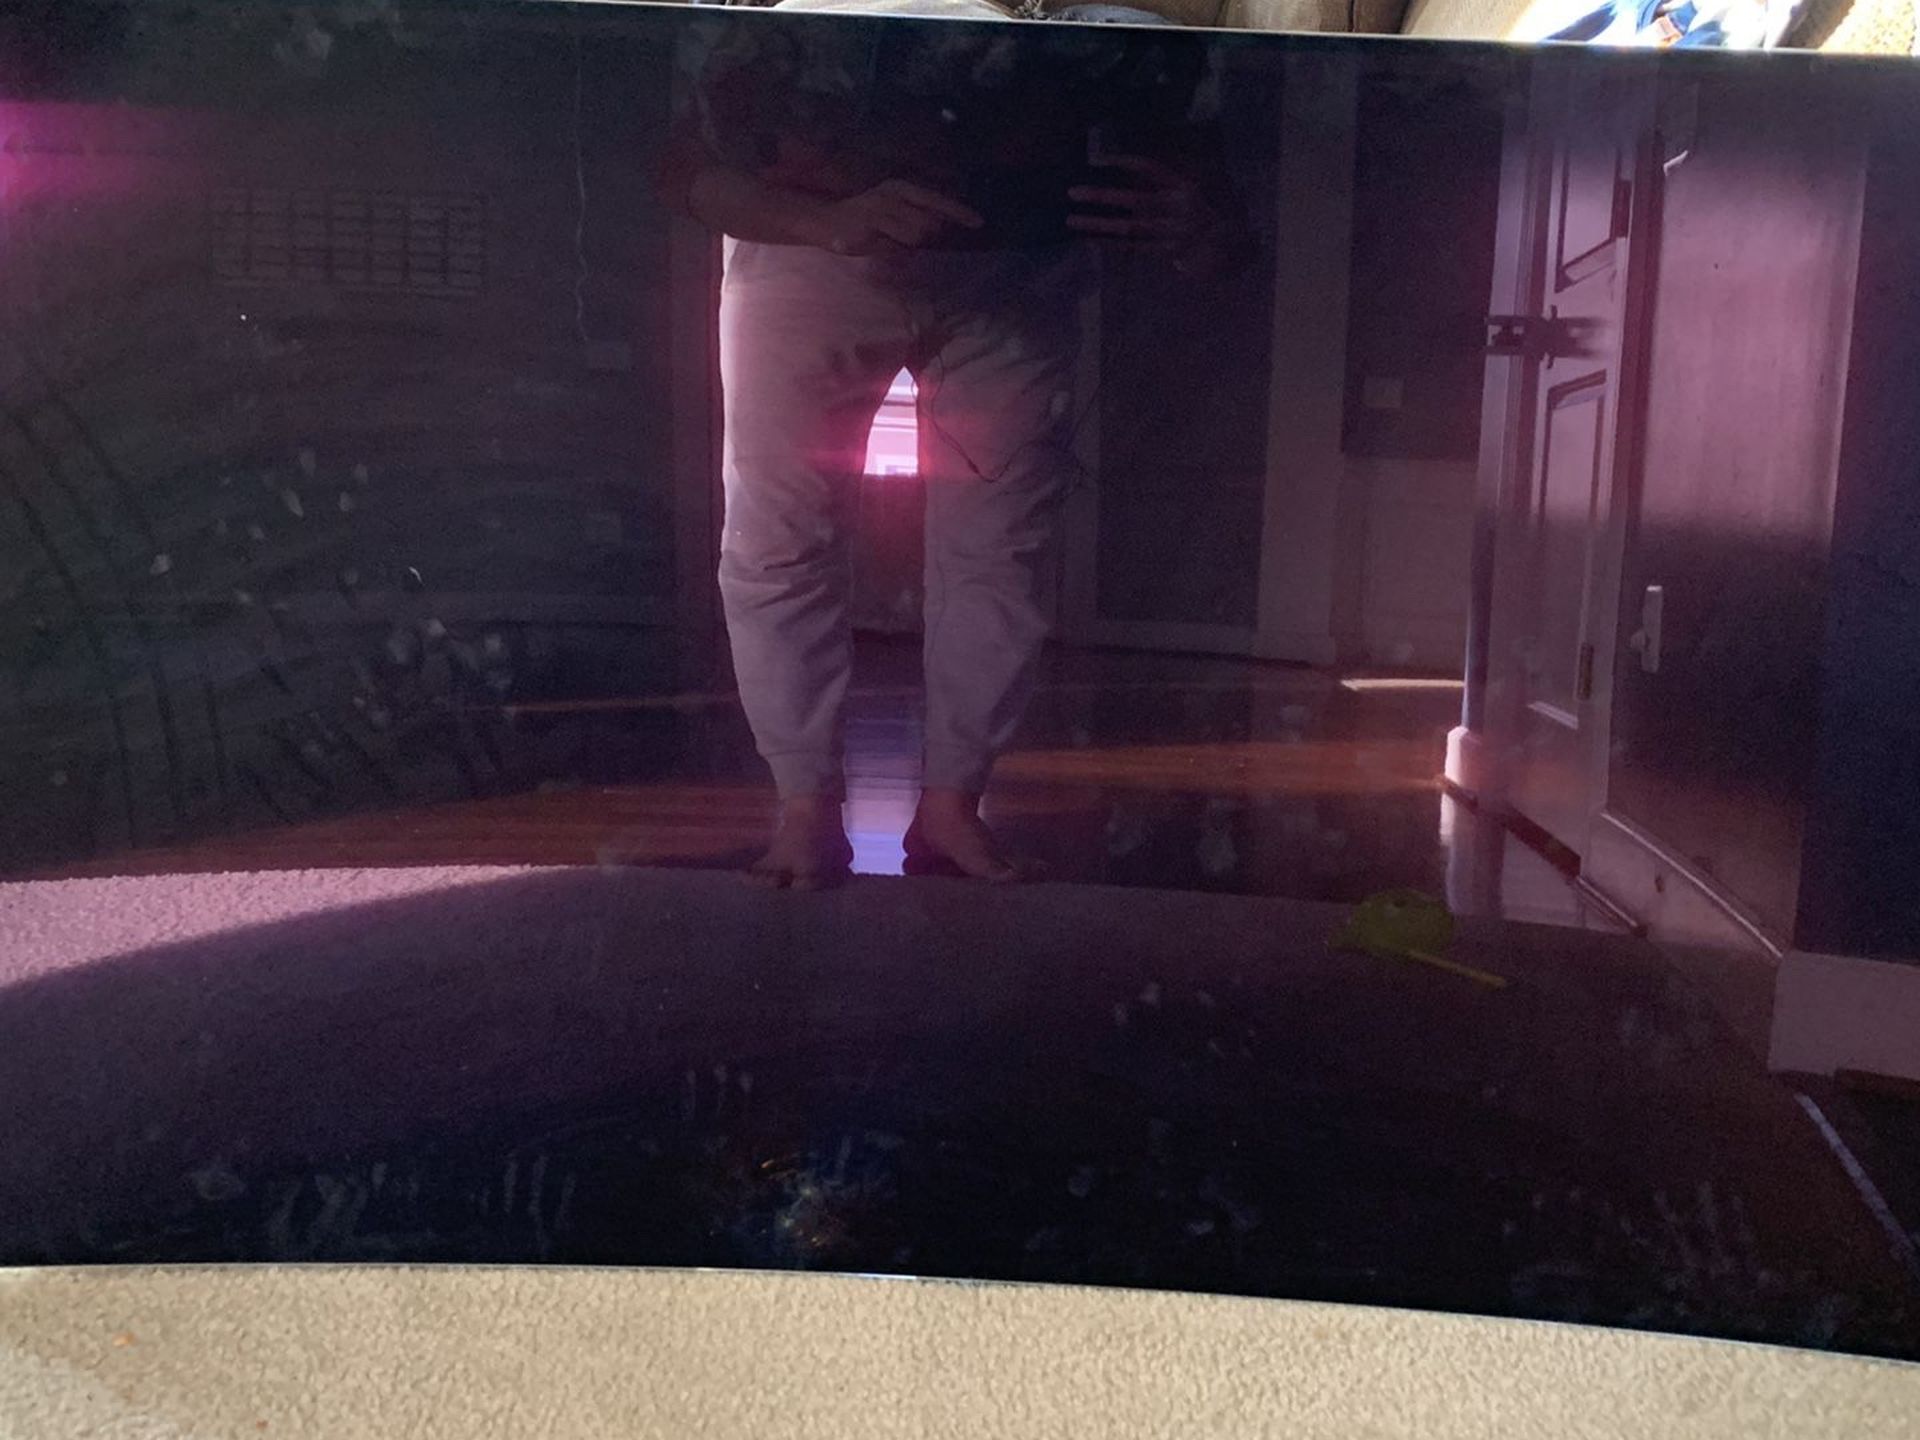 LG 65” OLED with cracked screen